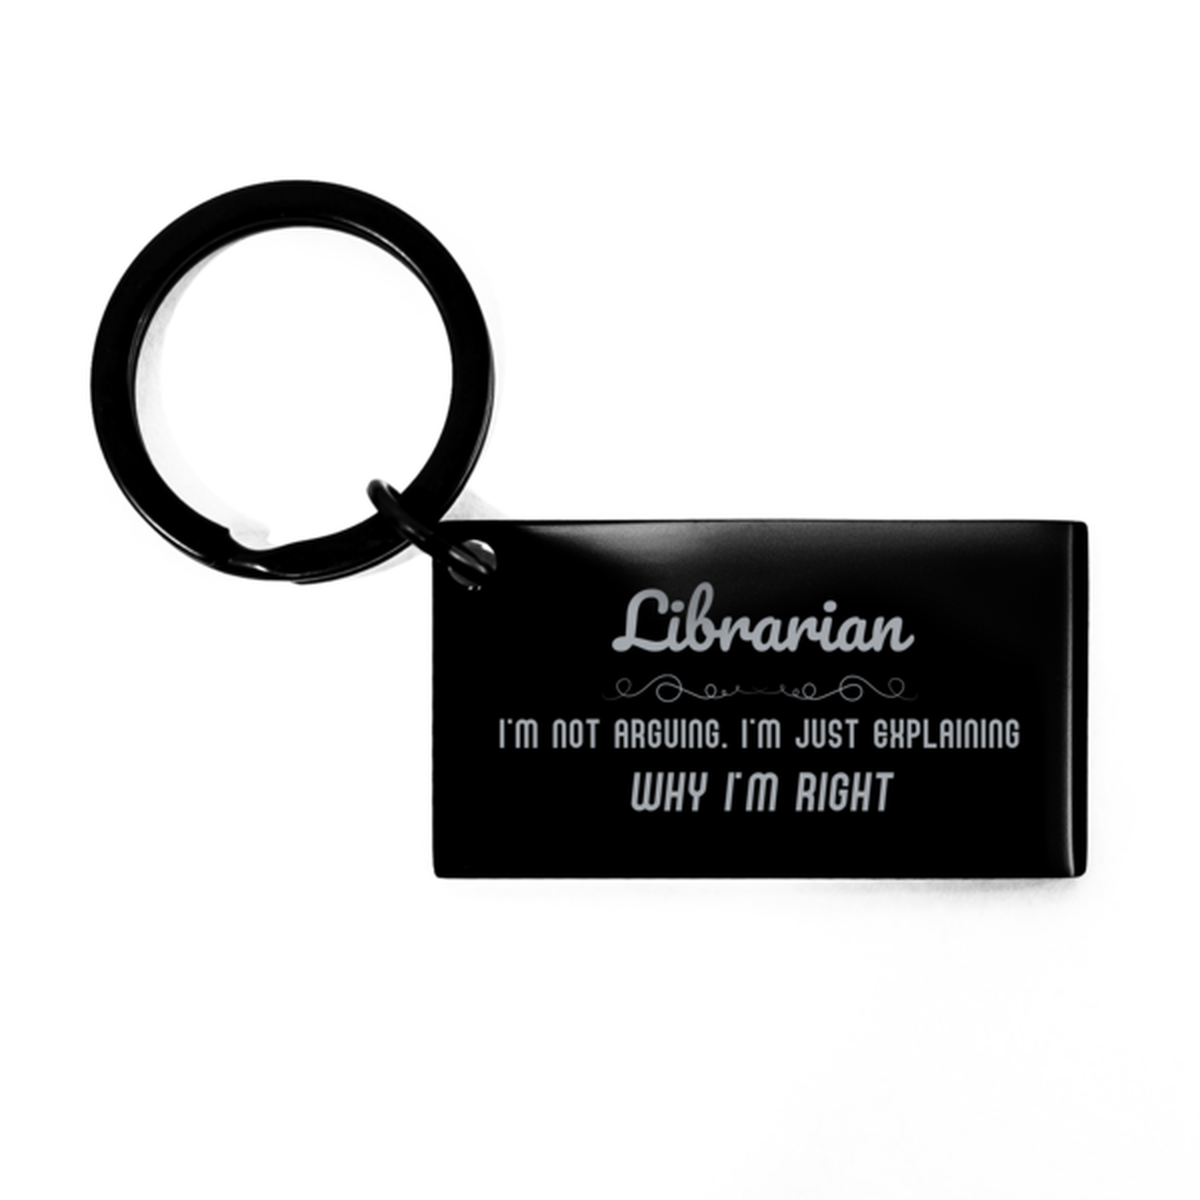 Librarian I'm not Arguing. I'm Just Explaining Why I'm RIGHT Keychain, Funny Saying Quote Librarian Gifts For Librarian Graduation Birthday Christmas Gifts for Men Women Coworker